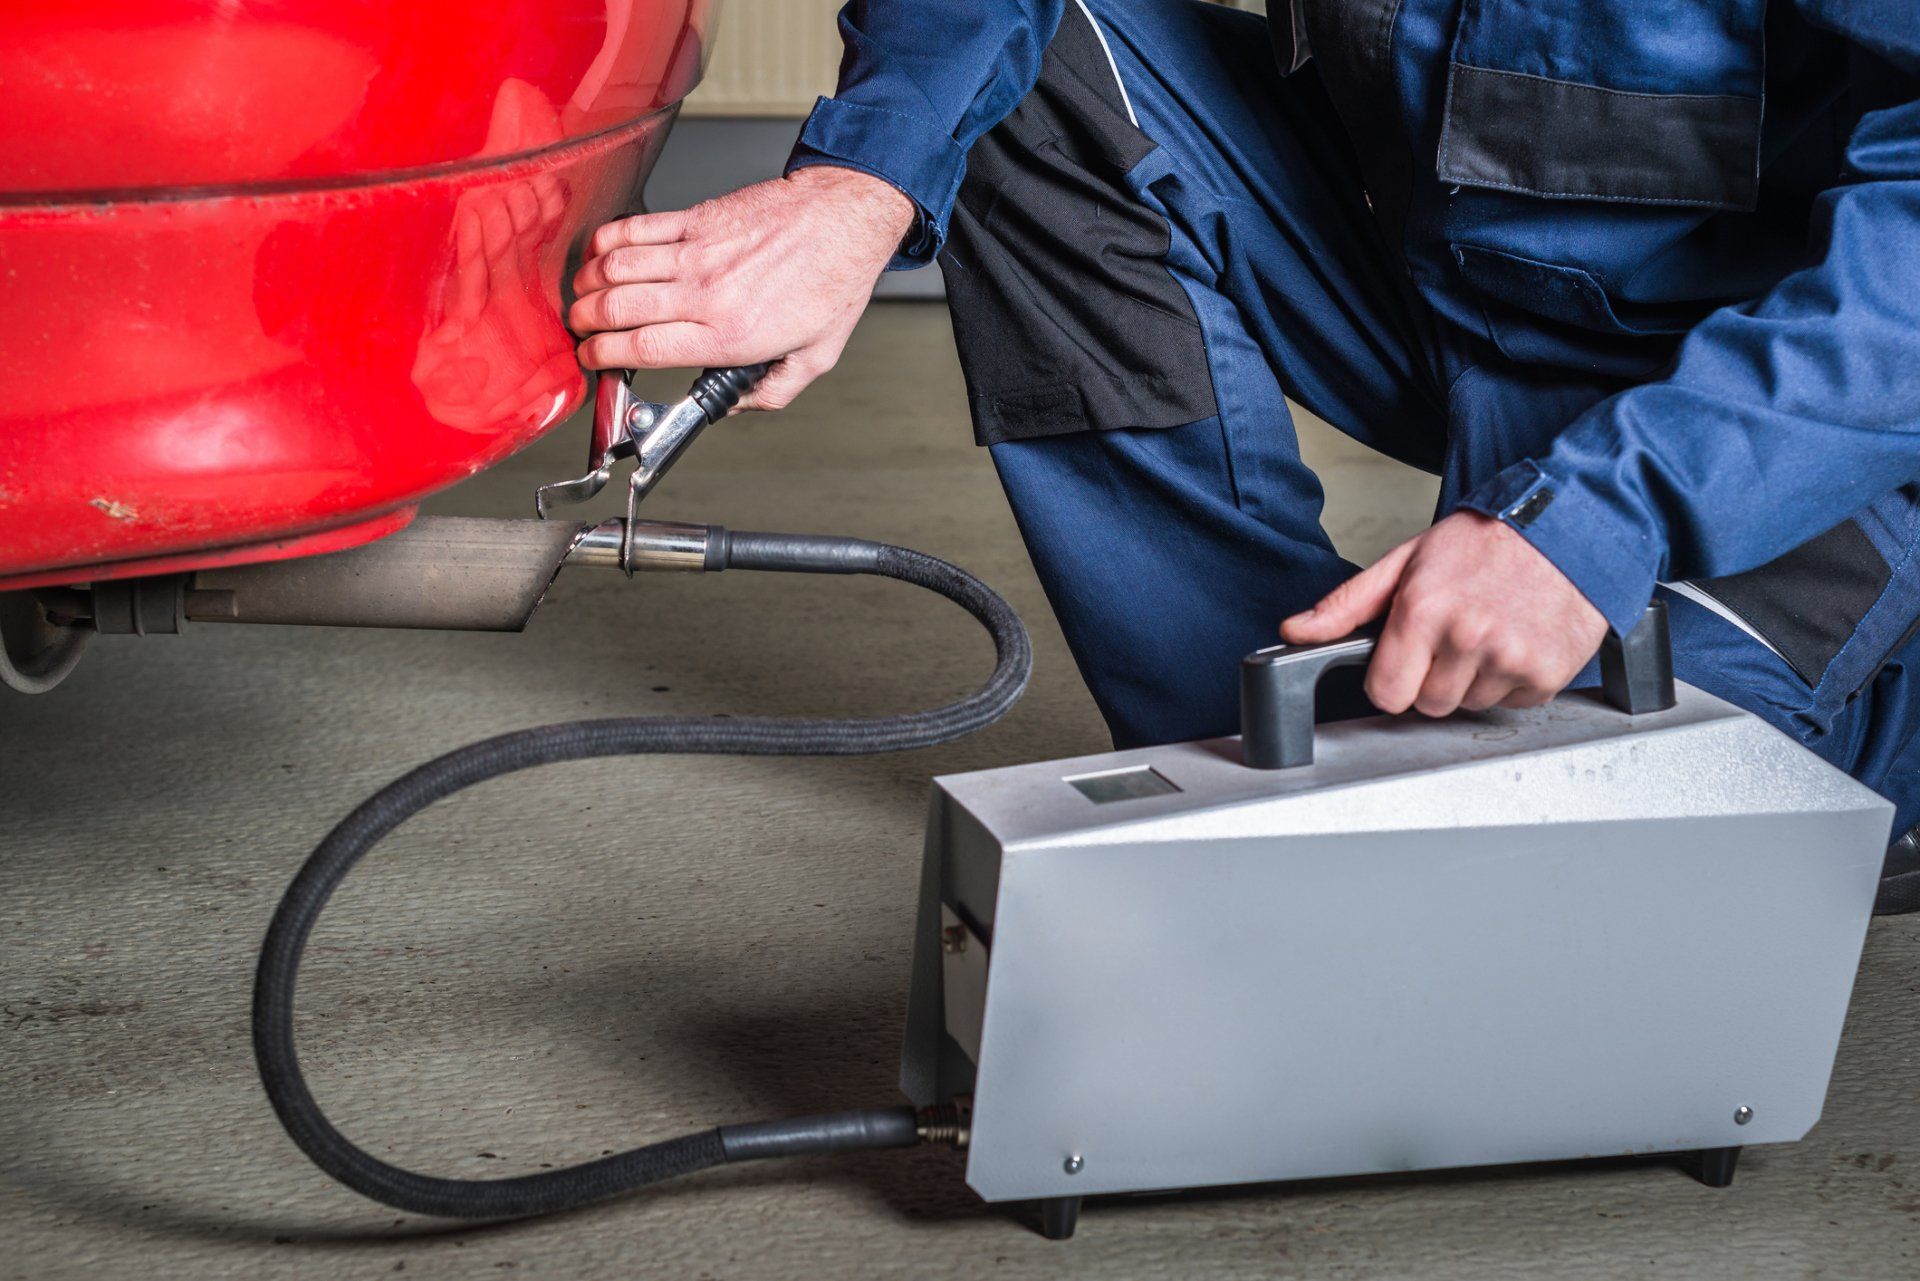 Muffler Shop — Diagnostic Sensor Applied to the Exhaust of Red Car in Tucson, AZ